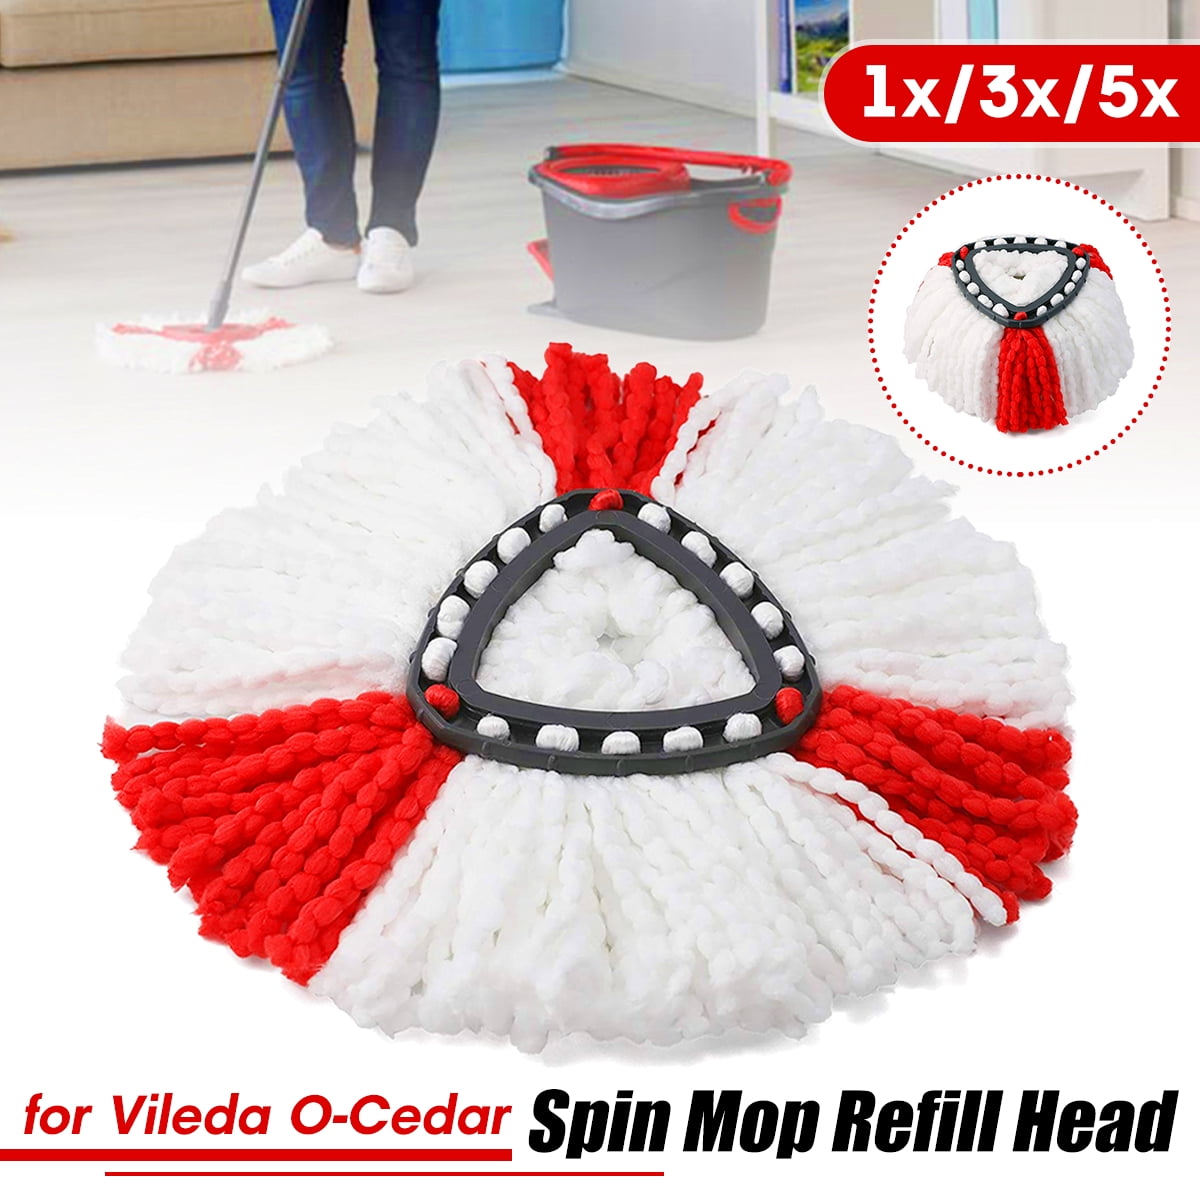 Microfiber Replacement Easy Cleaning Mopping Head Spin Refill Mop for O-Cedar 